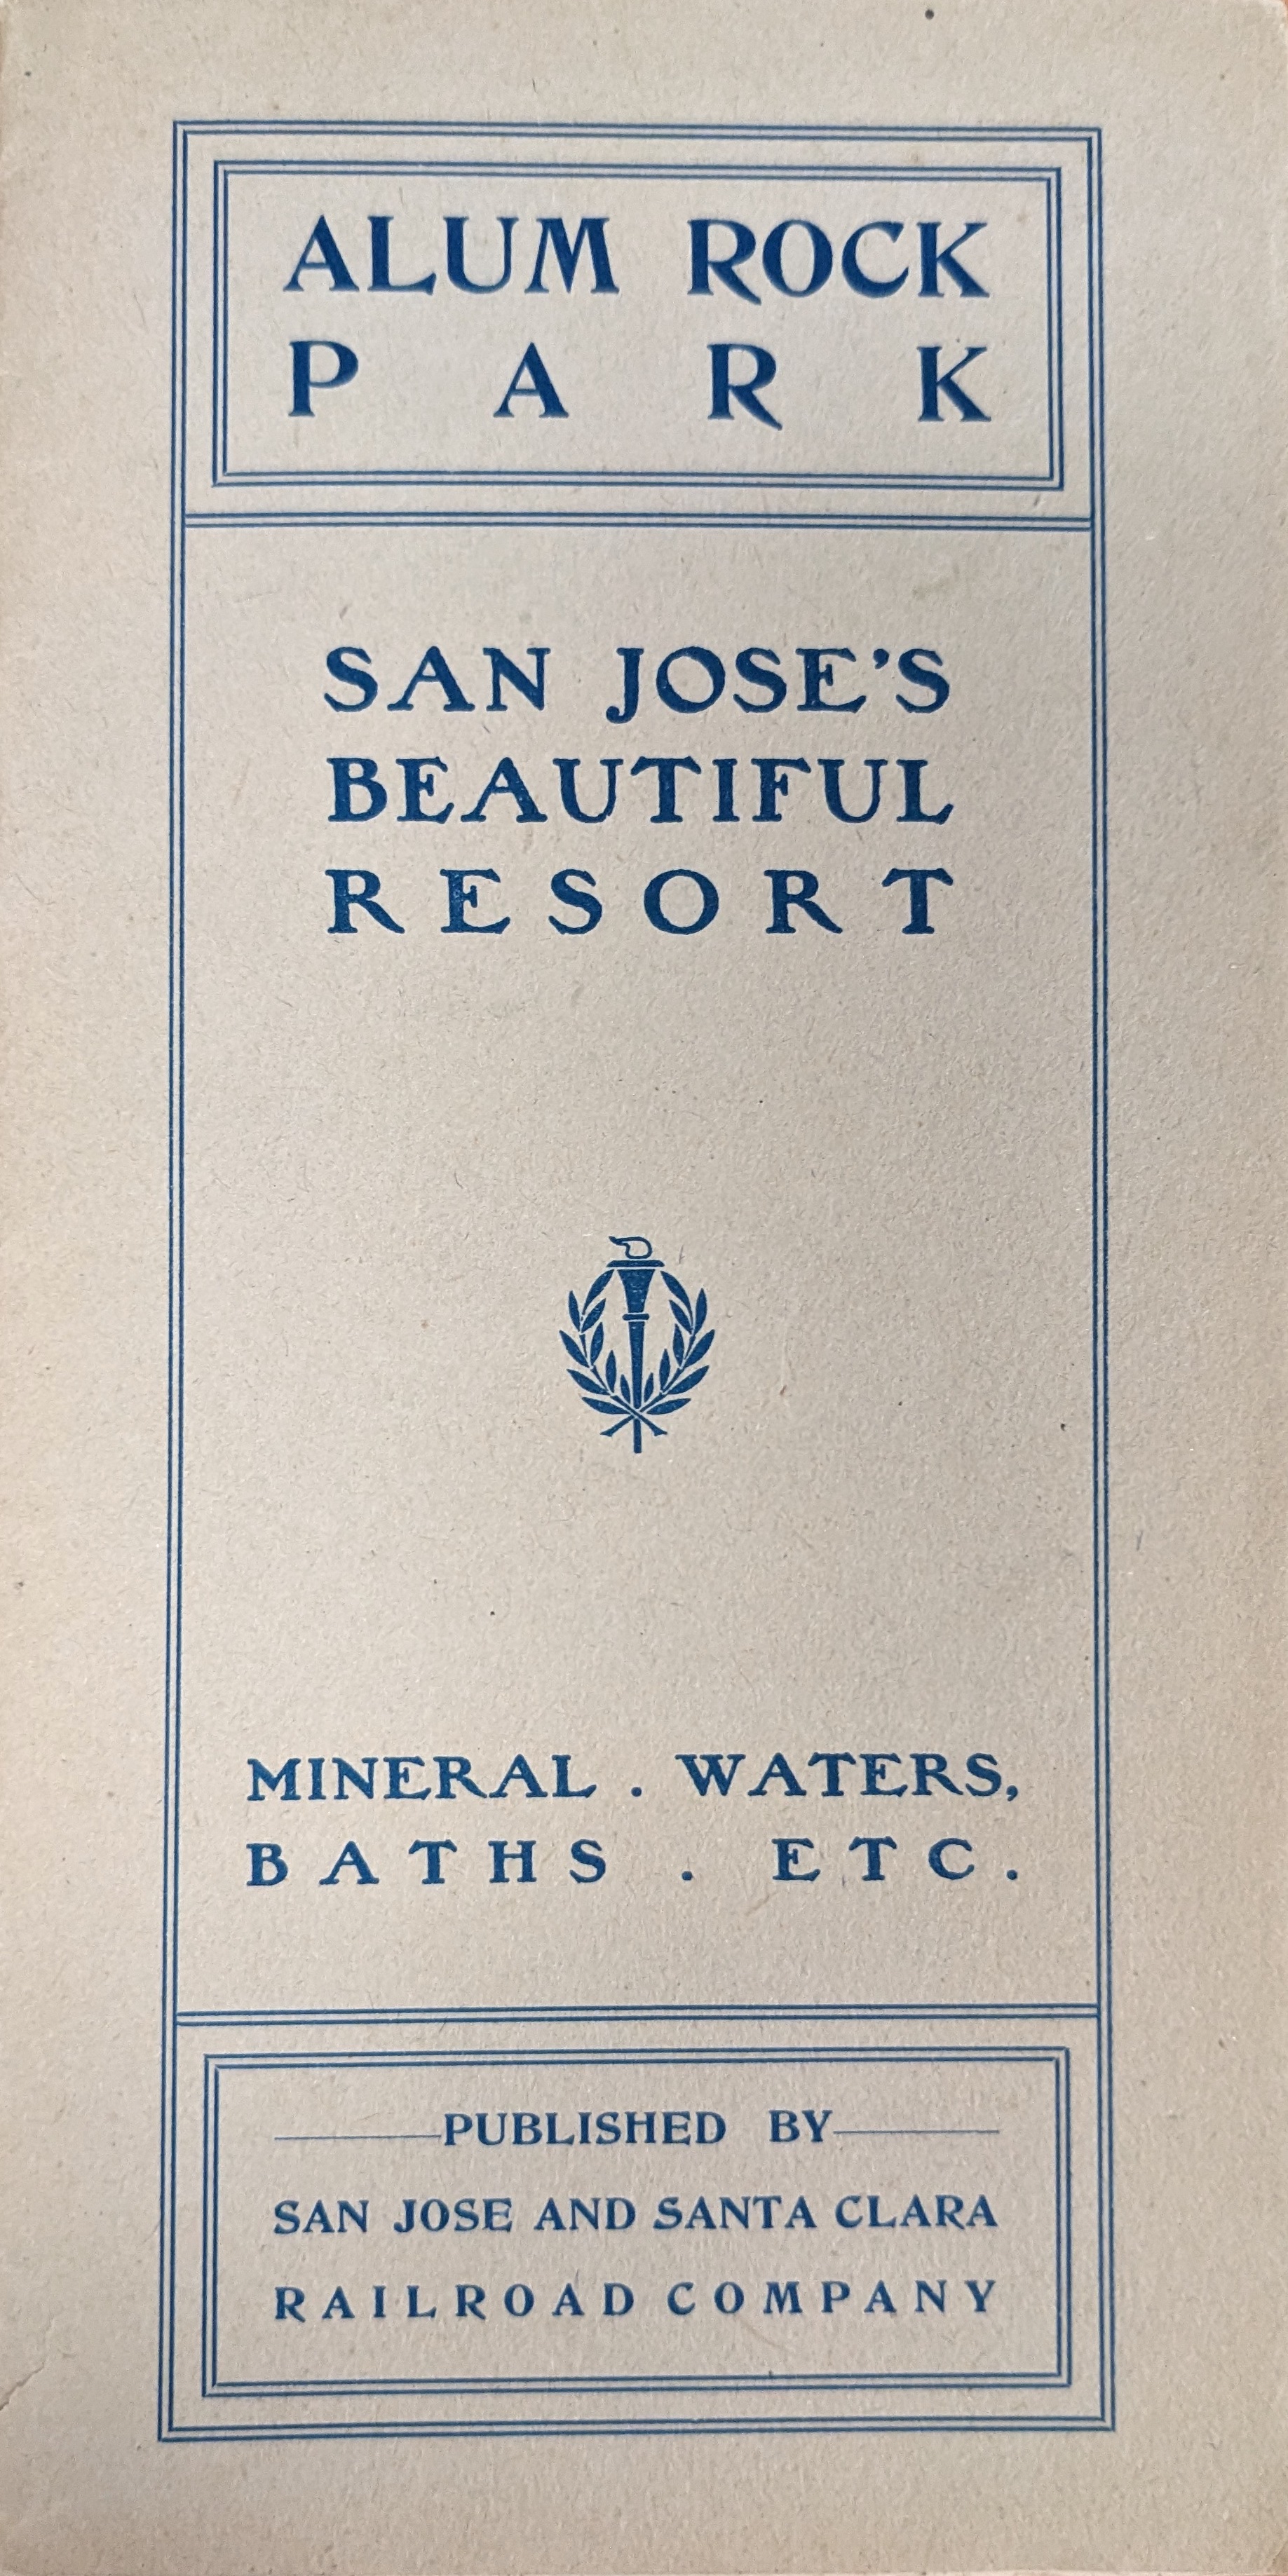 Cover of Alum Rock Park promotional booklet from 1915